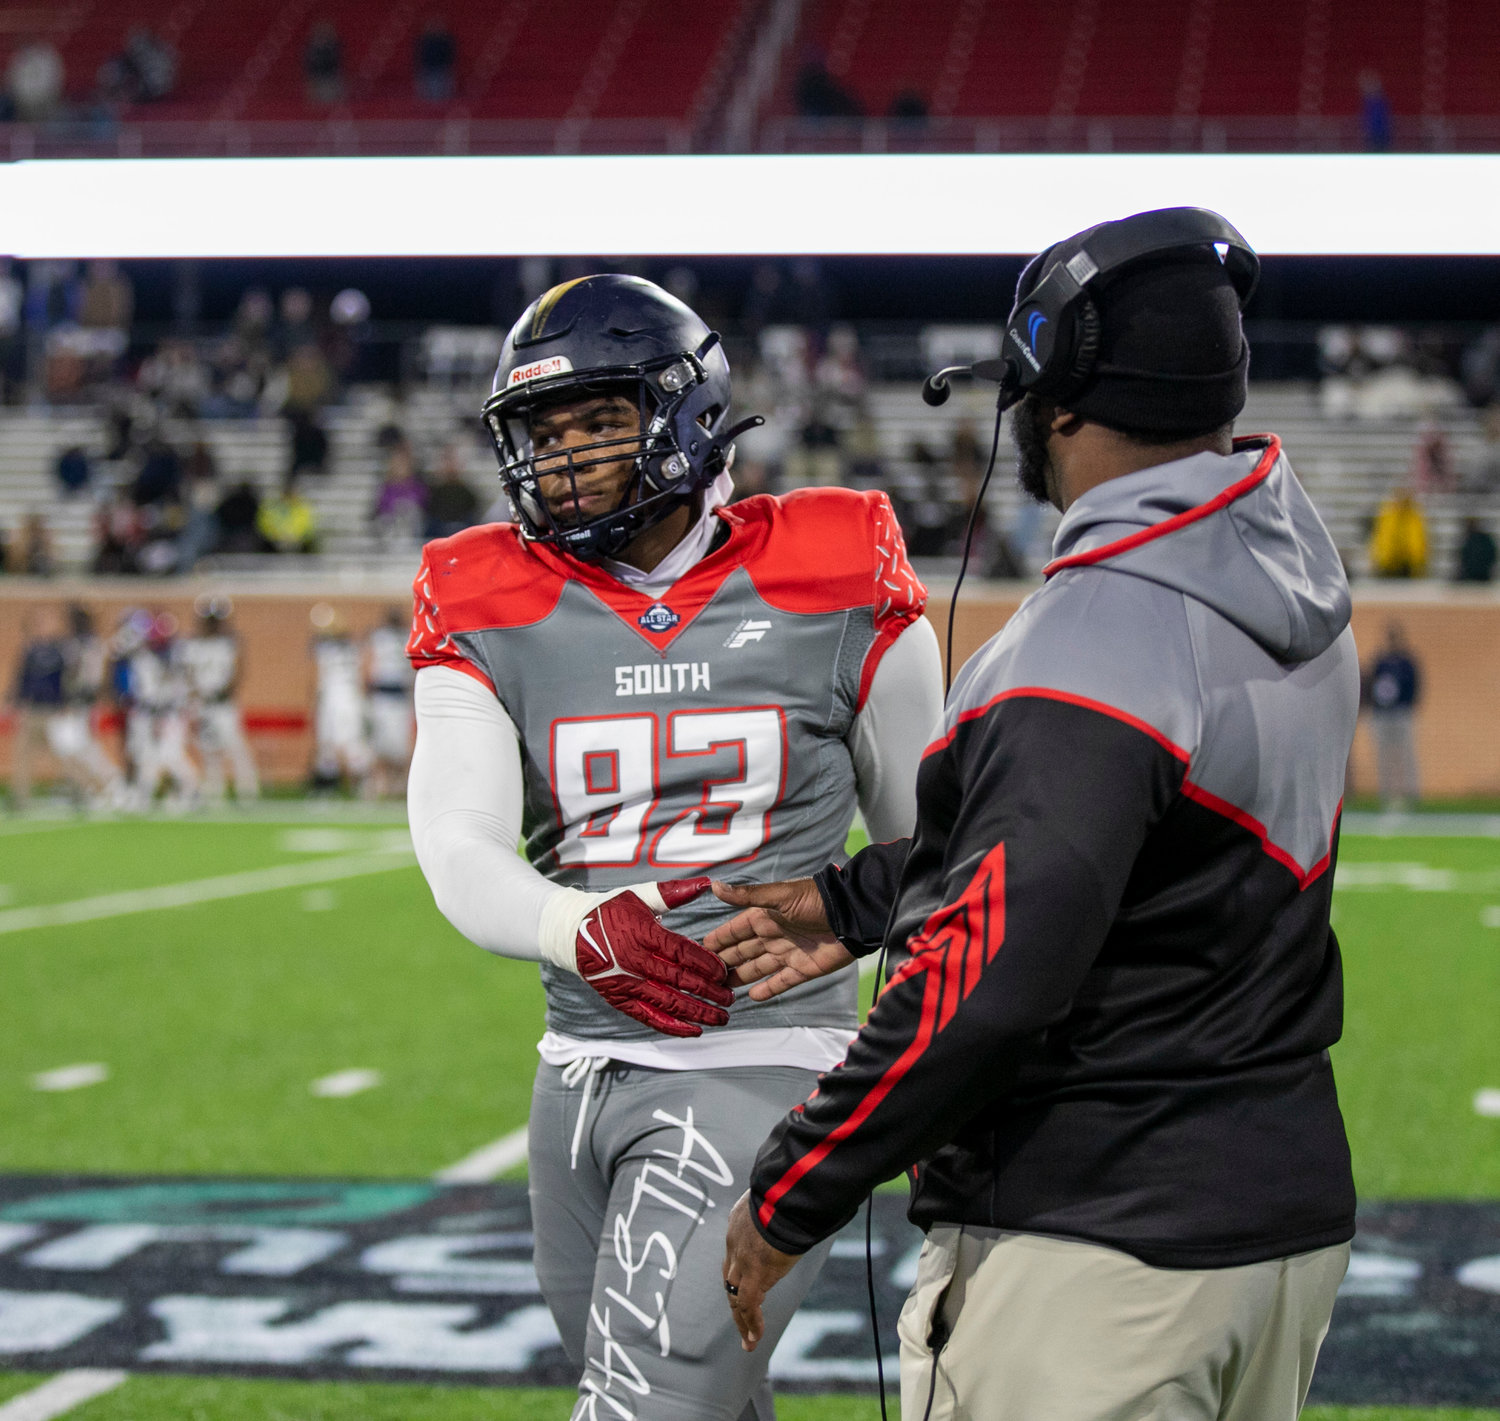 Foley head coach Deric Scott acknowledges AJ Prim as he comes off the field at the end of Friday’s all-star football game at the University of South Alabama. Prim collected four tackles in the South’s 42-7 win that marked a second straight victory.